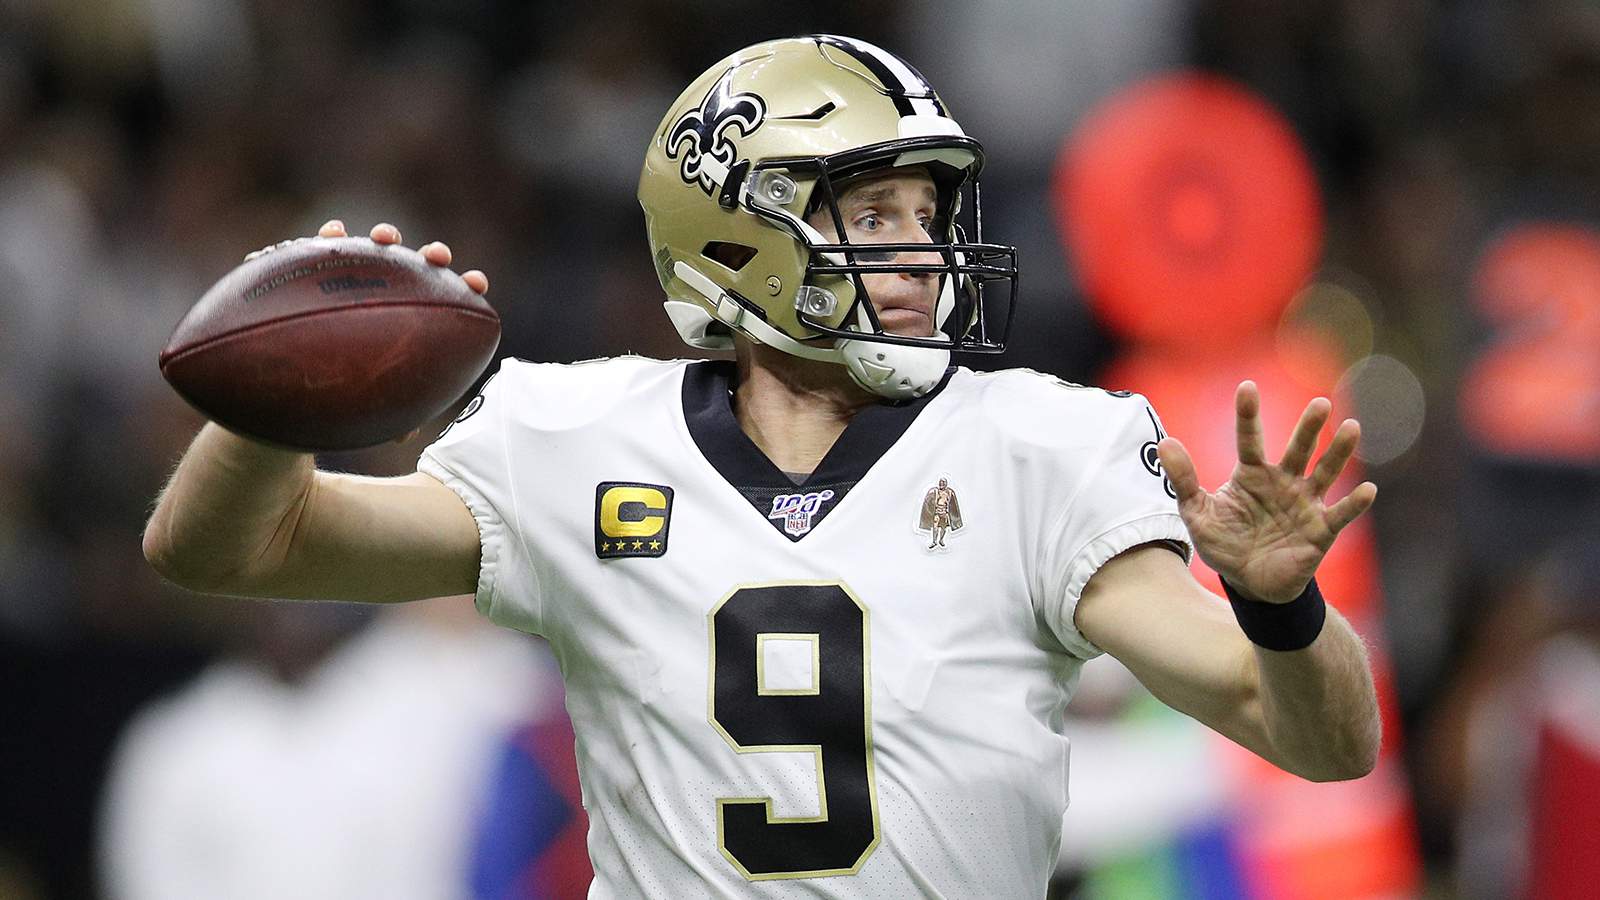 Drew Brees issues apology for 'insensitive' comments